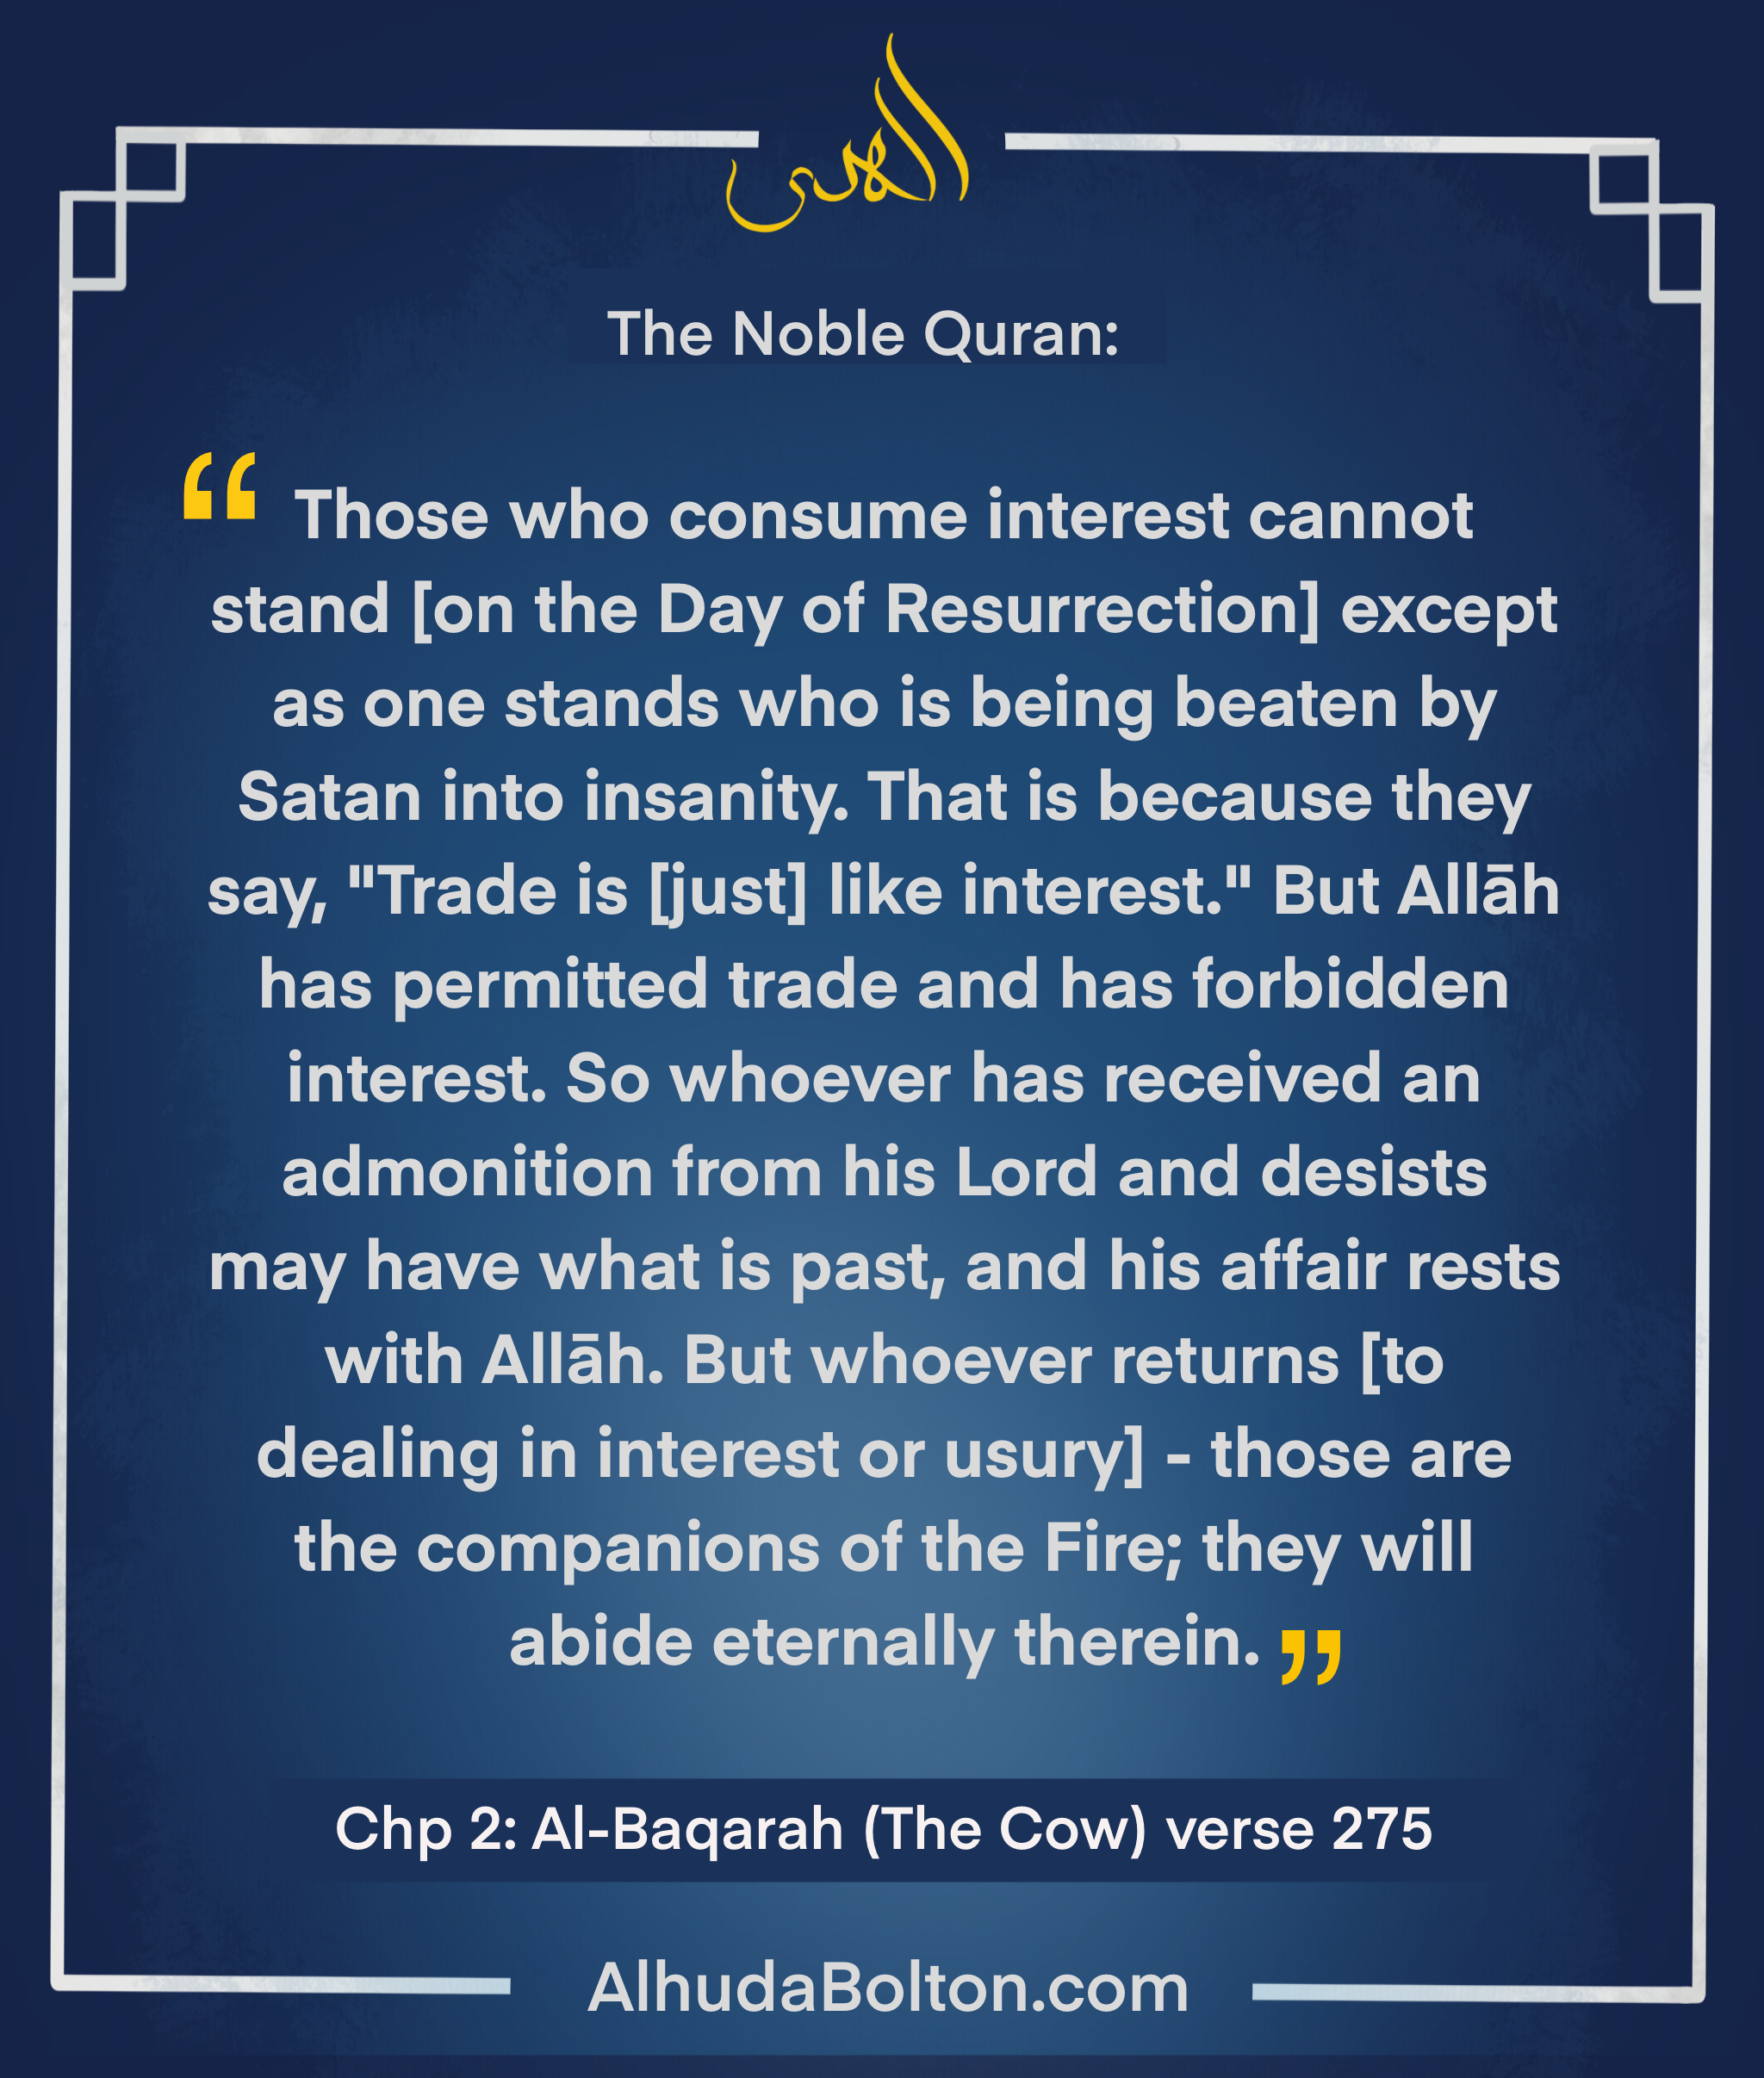 Weekly Quran: Warning and advice for those who consume interest